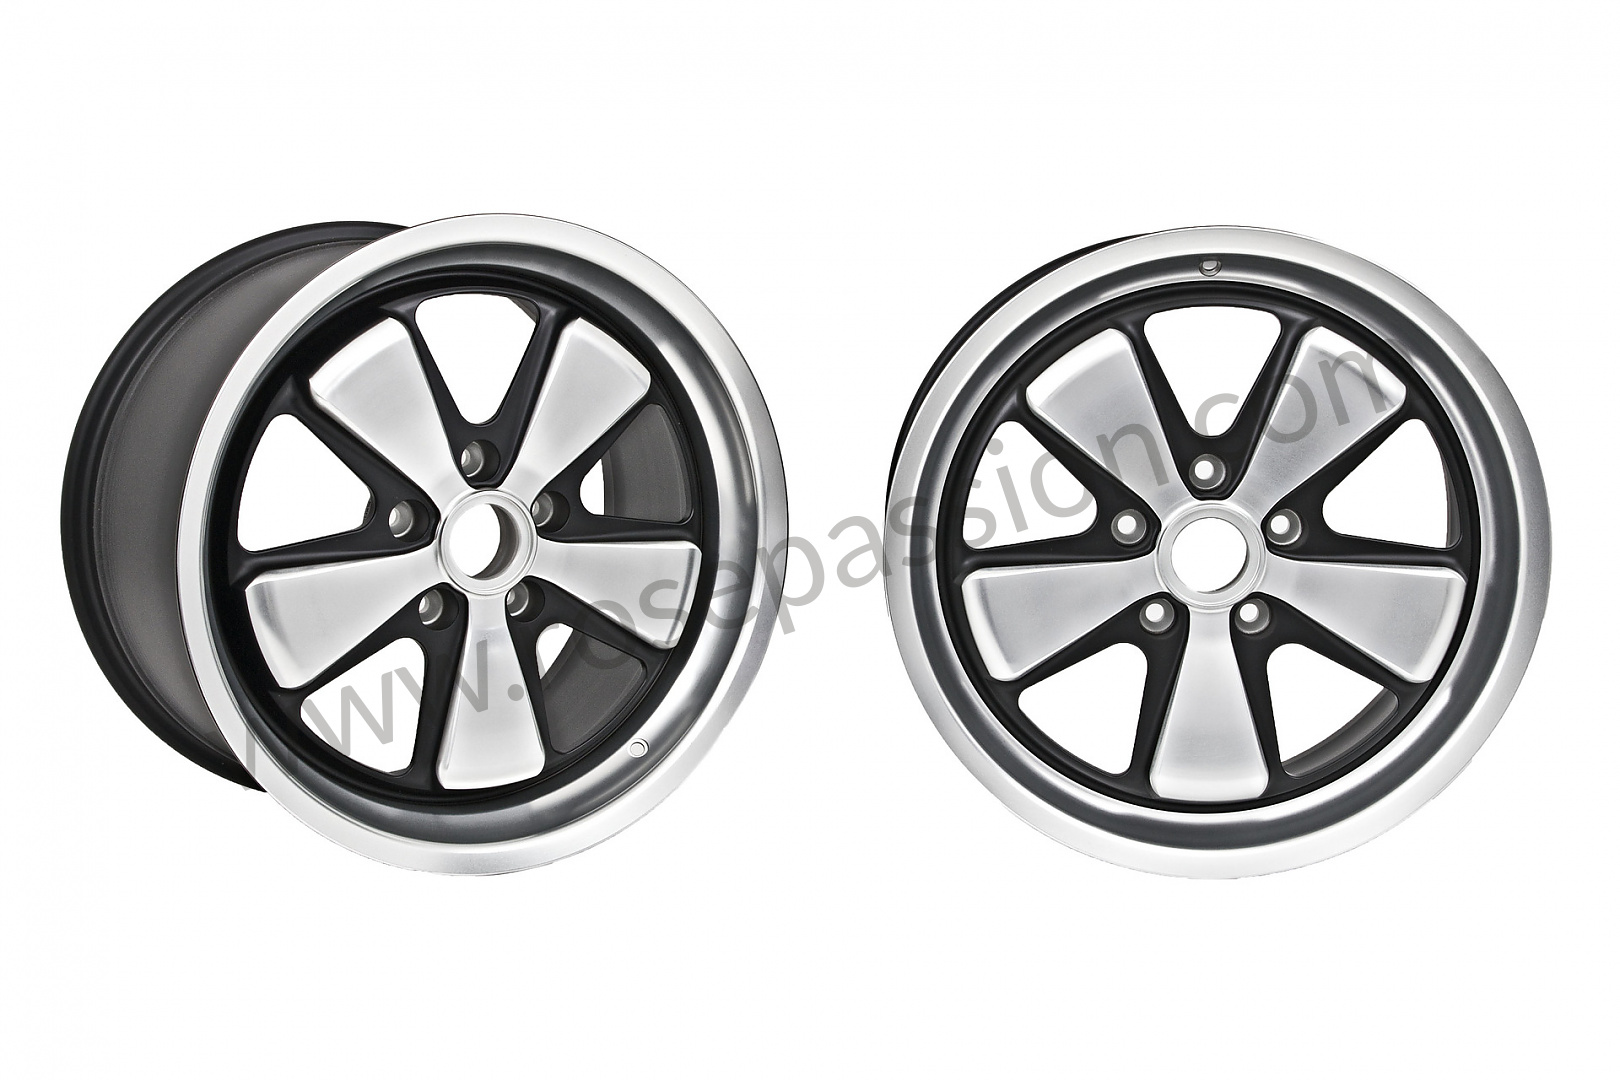 P189728 - Fuchs wheels, 19 inch, set of 4 wheels (polished and black  finish) 8,5 and 11 - ET56 FRONT + ET51 REAR INCHES for Porsche 997-2 / 911  Carrera / 2010 / 997 sport classic / Coupe / Manual gearbox, 6 speed